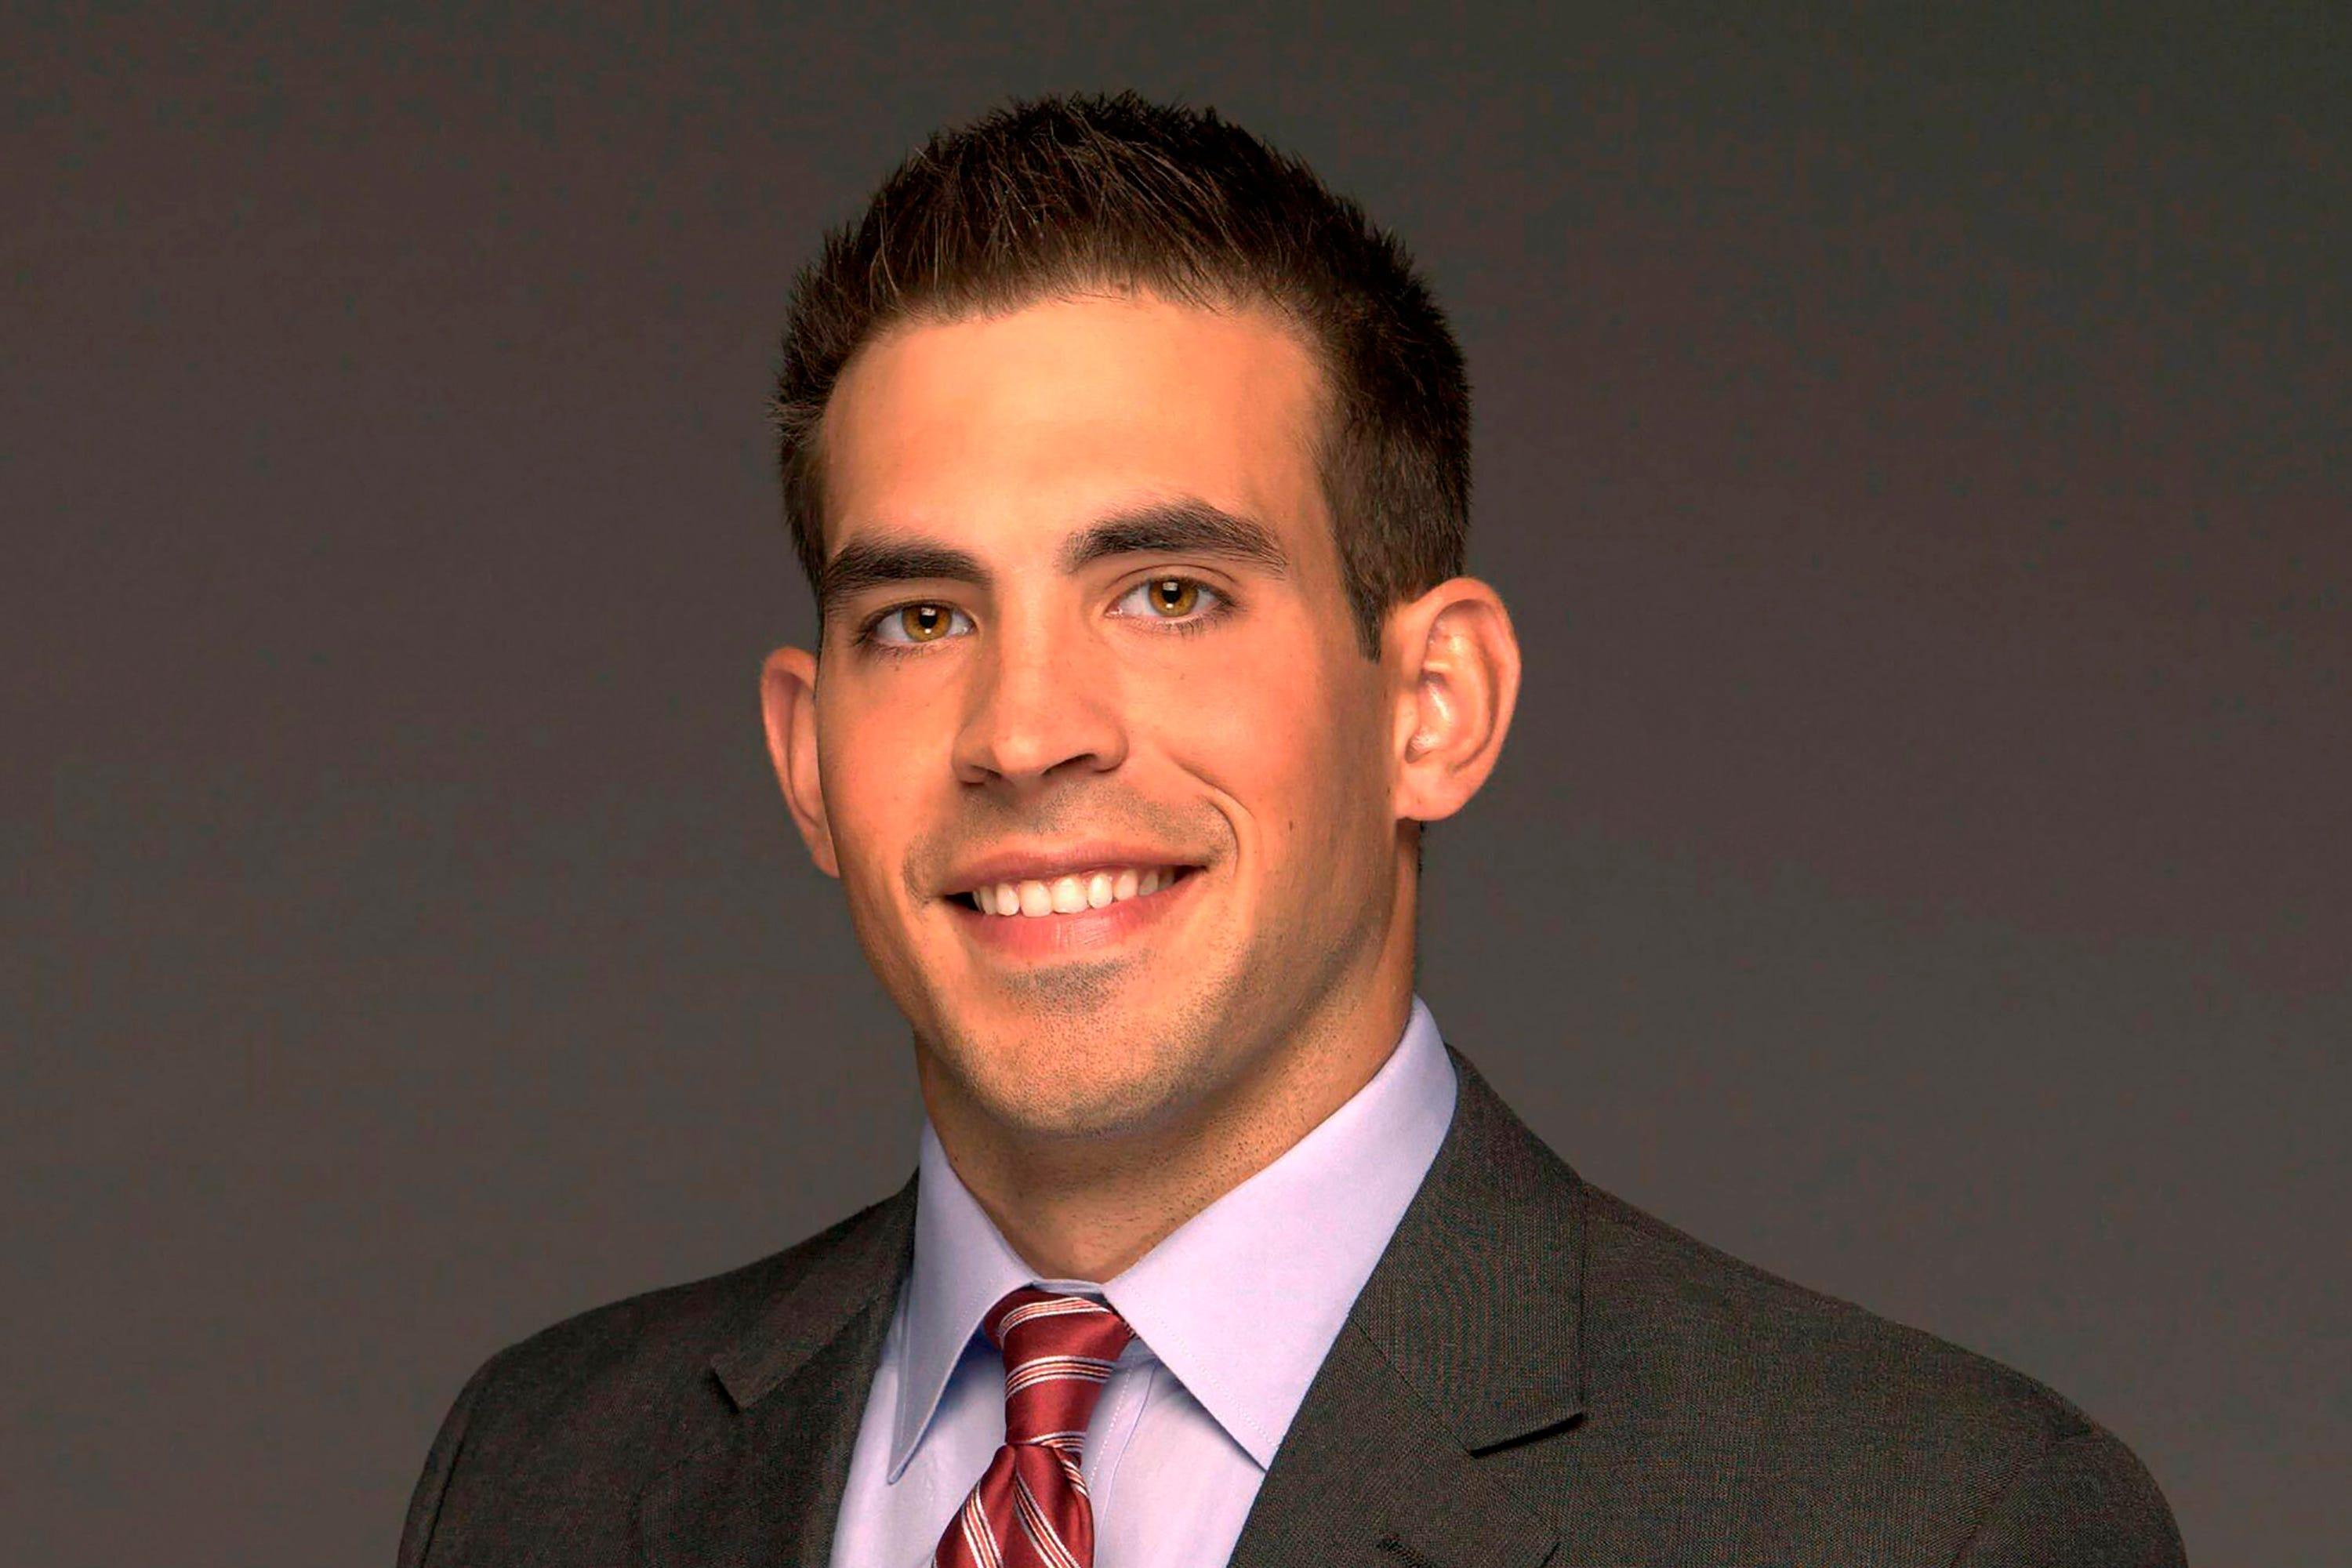 Joe Davis will have the play-by-play call of the Los Angeles Rams vs. Baltimore Ravens NFL Week 14 game on Sunday on FOX.